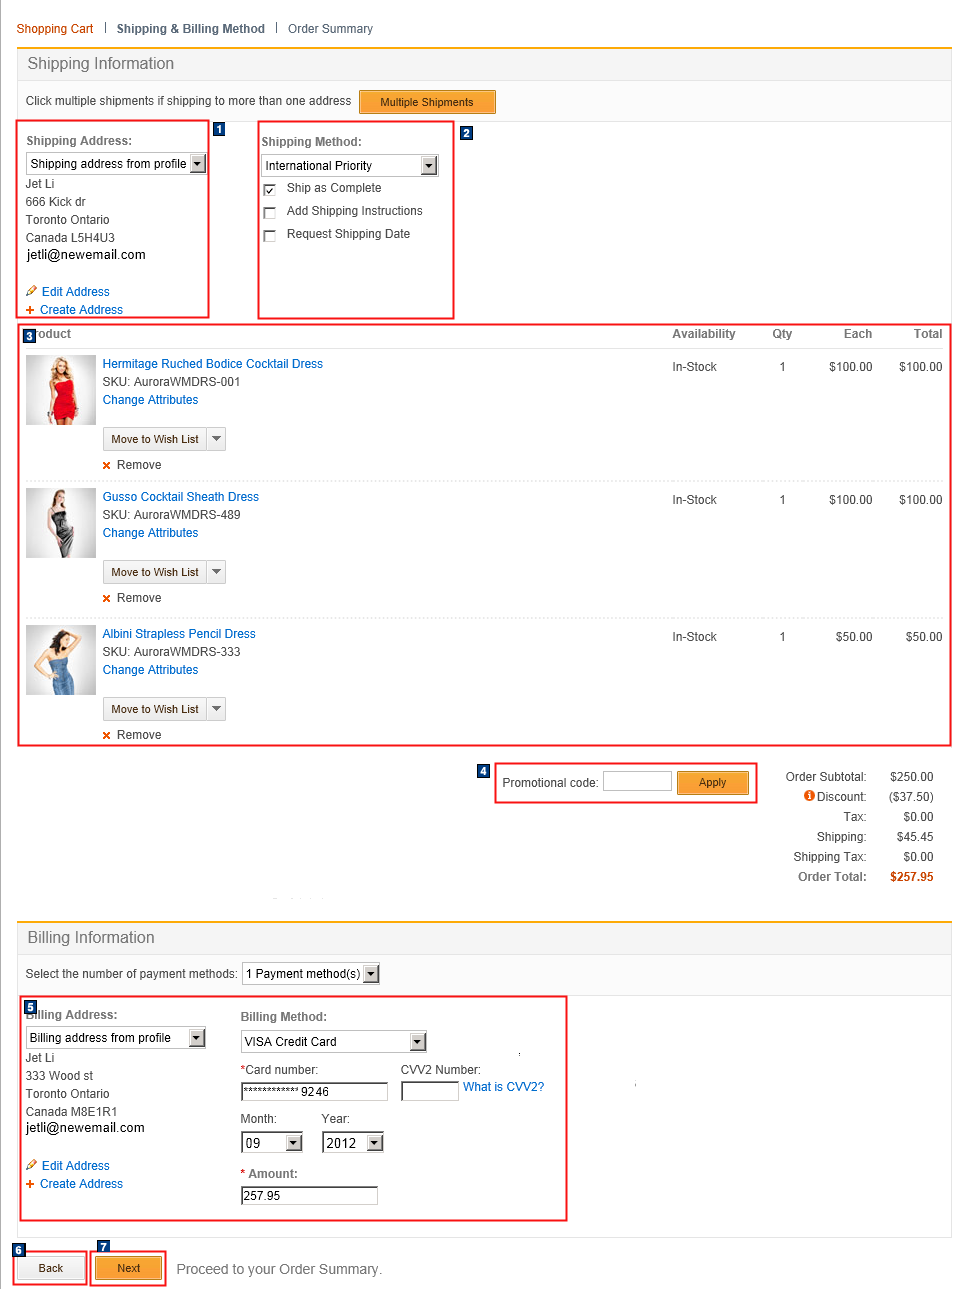 Elements of the Quick Checkout page screen capture